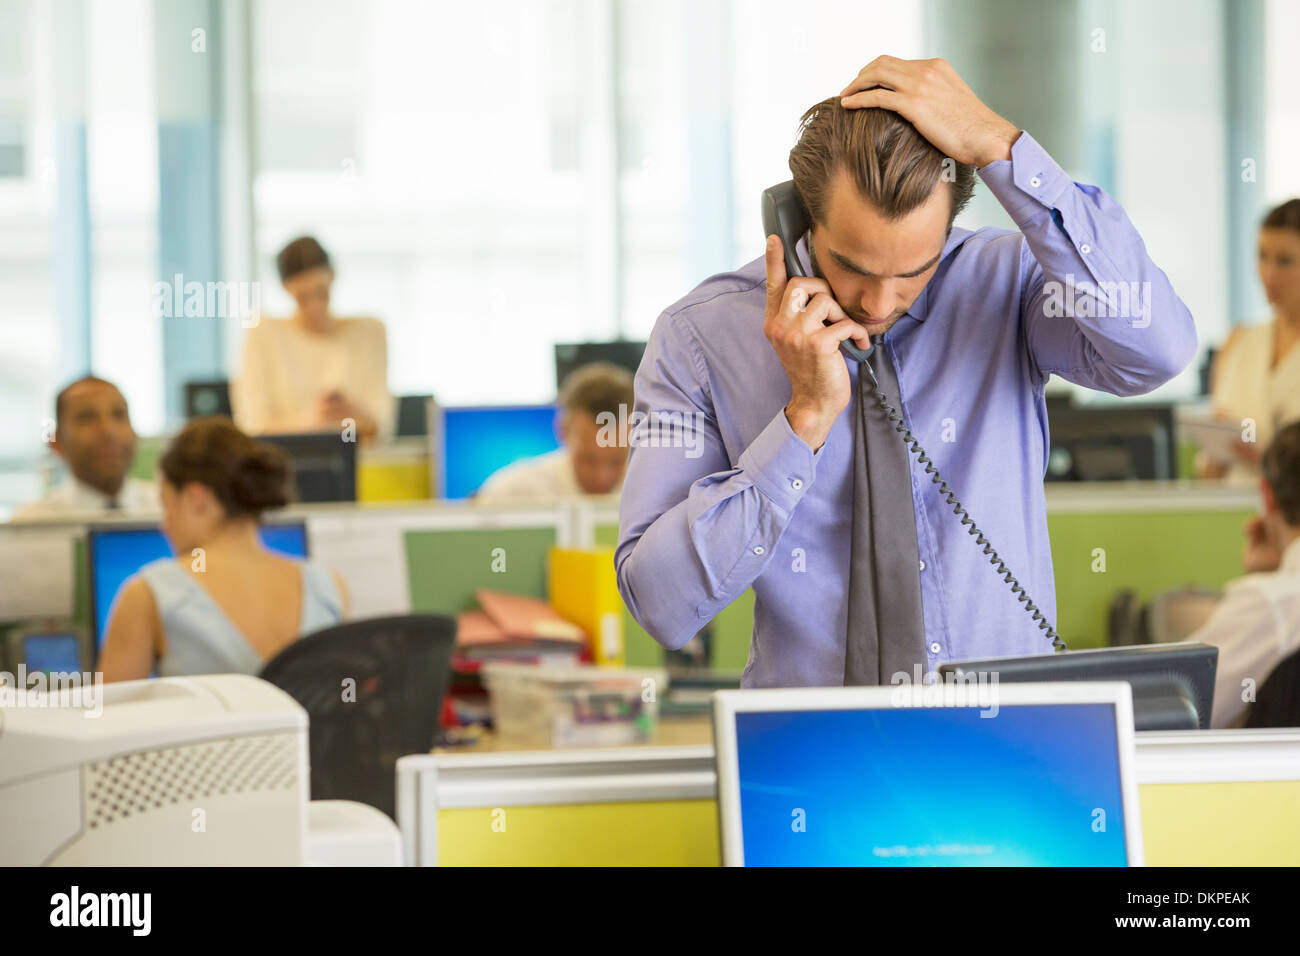 Businessman talking on telephone in office Banque D'Images